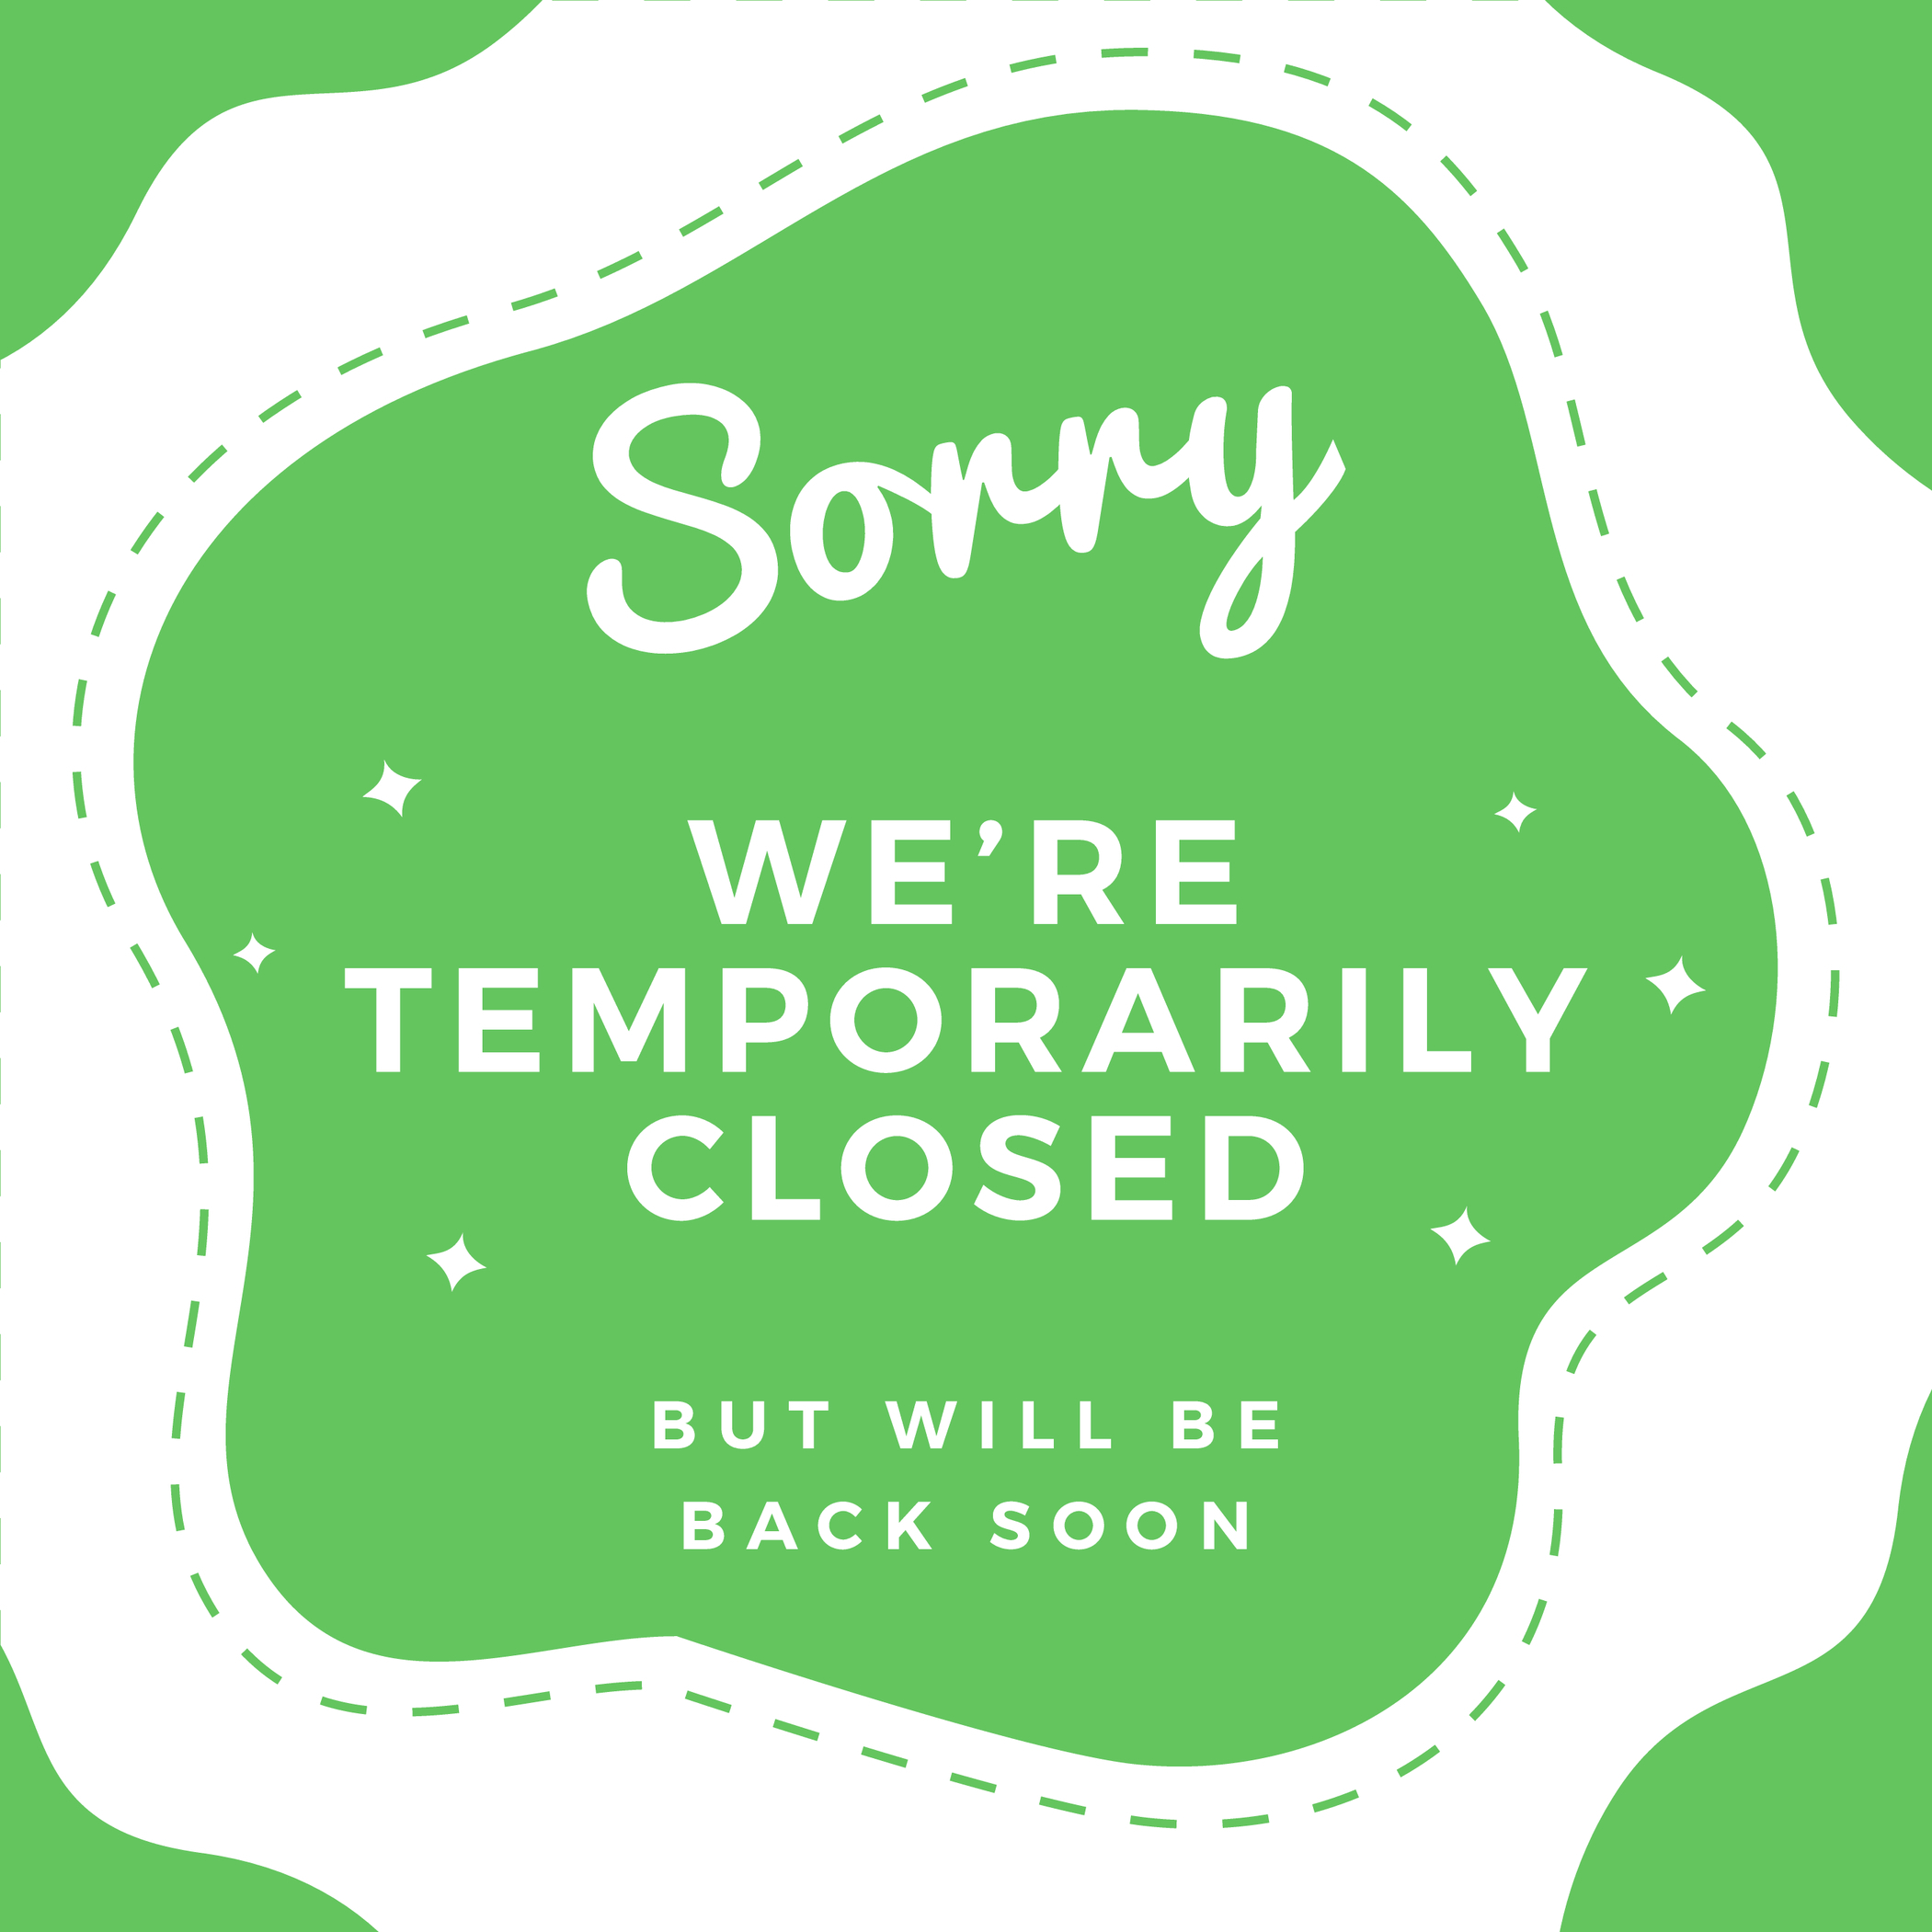 THURSDAY 3RD FEBRUARY 2022 – COUNCIL OFFICES CLOSED TEMPORARILY